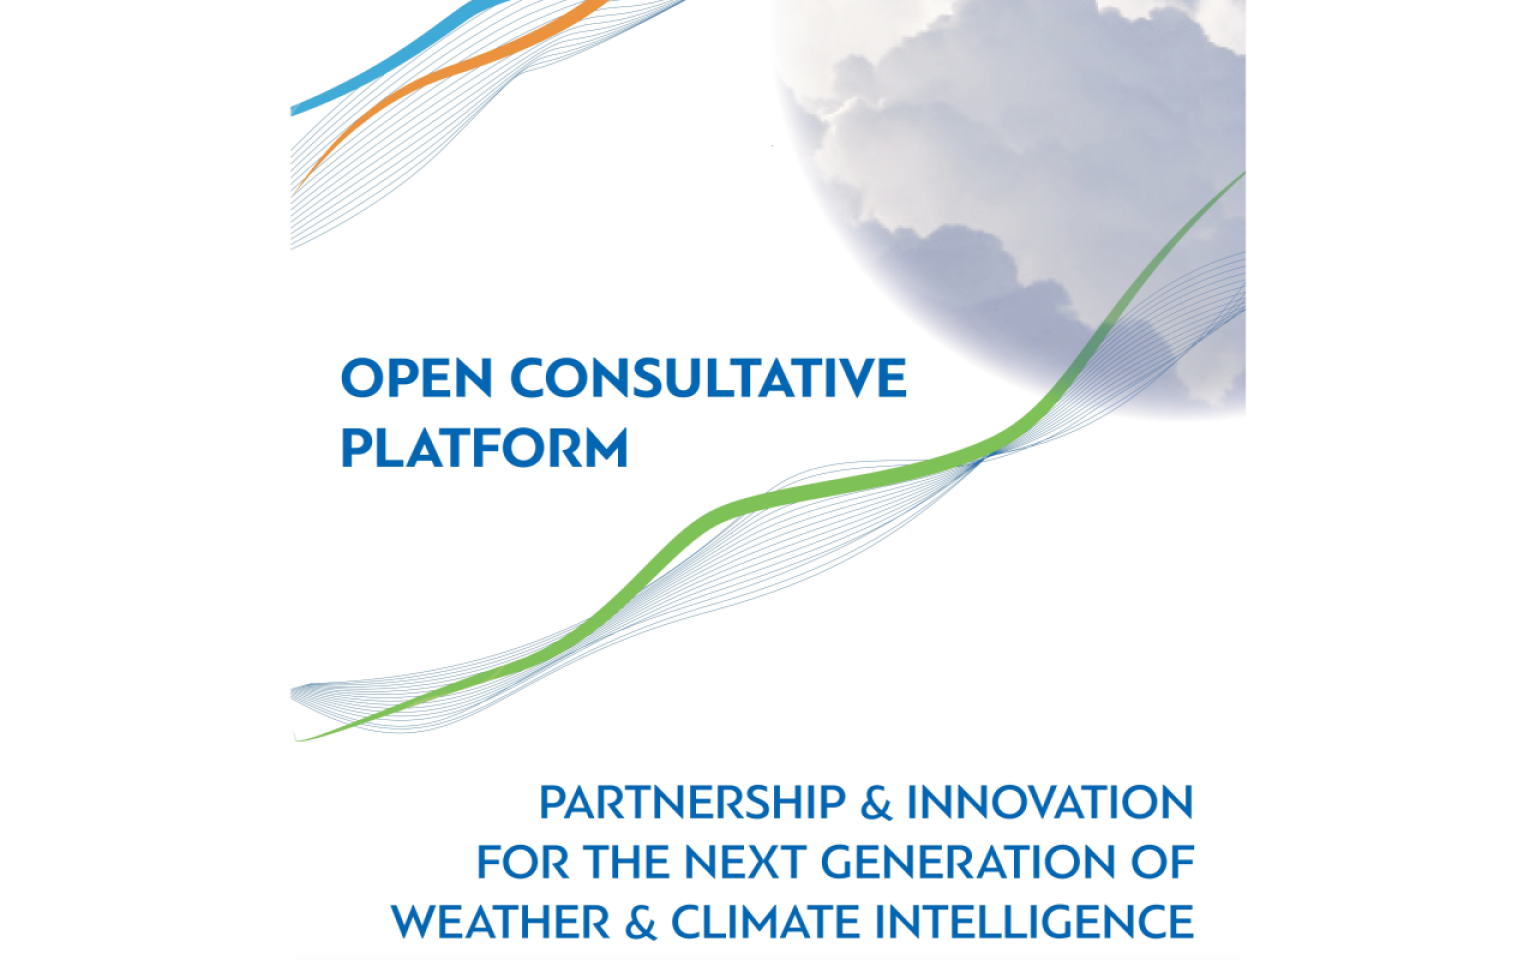 Open collaborative platform partnership and innovation for weather and climate intelligence.